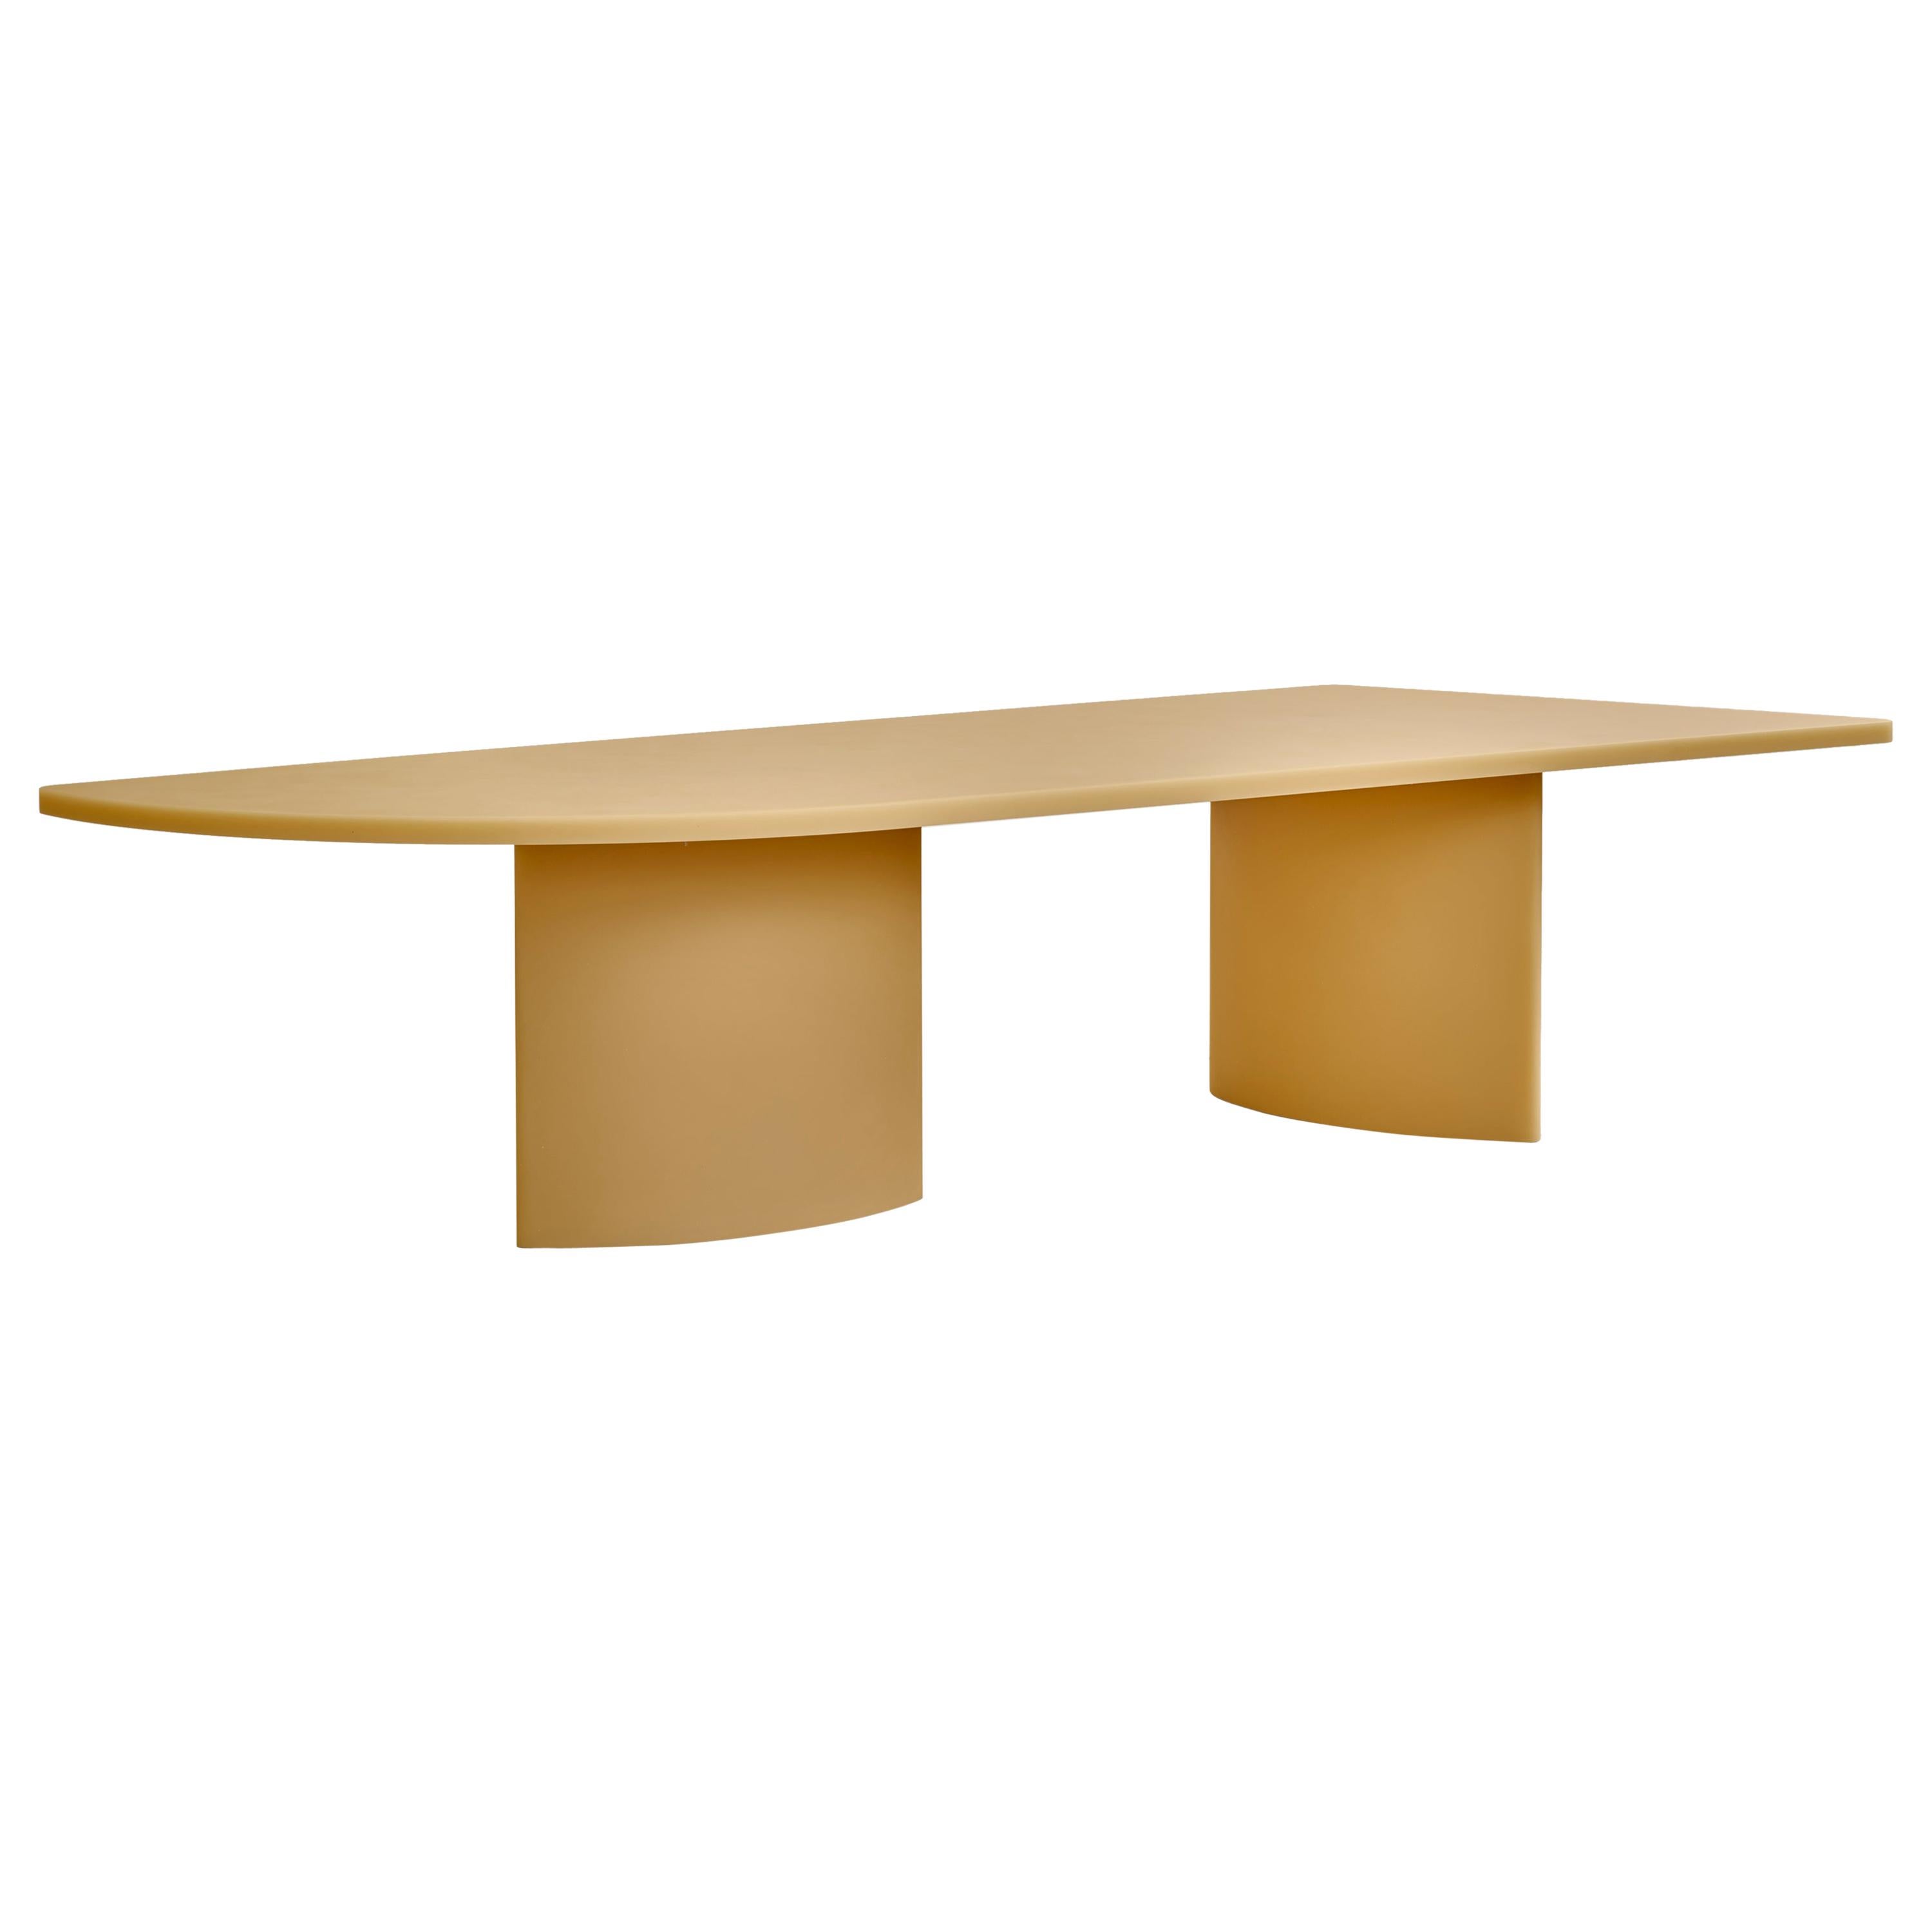 Contemporary Resin Dining Table by Sabine Marcelis, SOAP Series, Honey Yellow